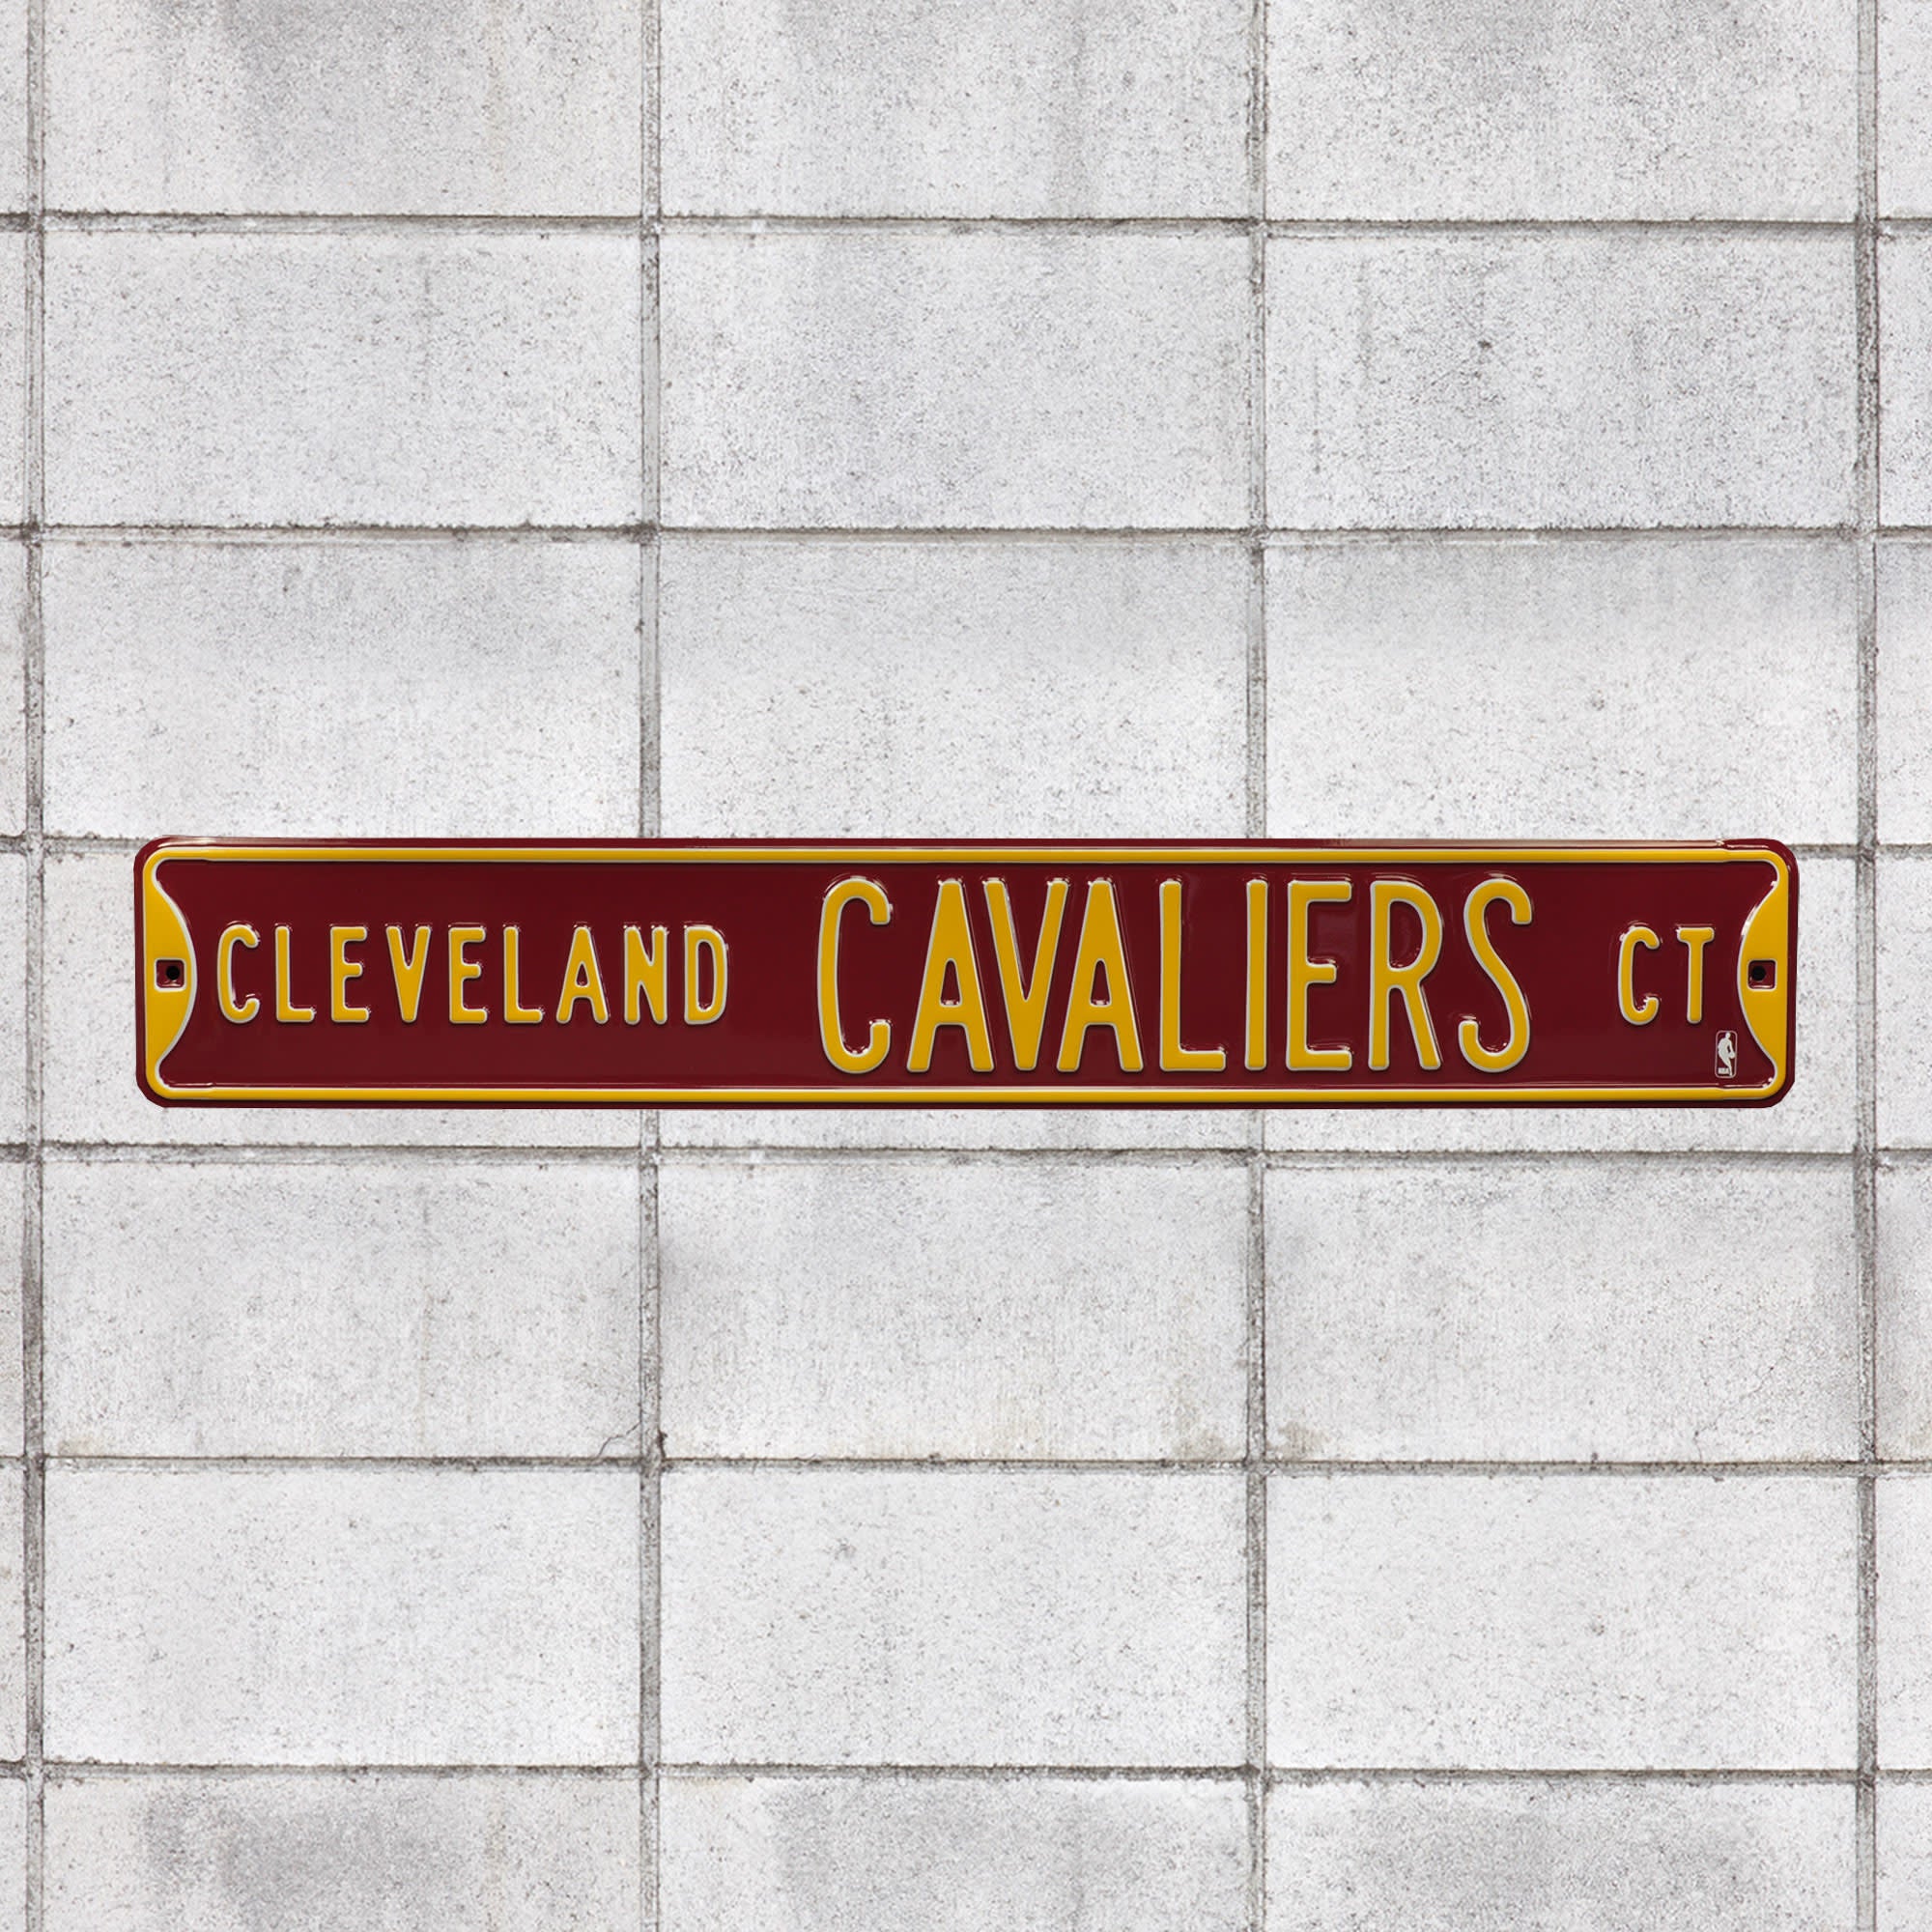 Cleveland Cavaliers: Court - Officially Licensed NBA Metal Street Sign by Fathead | 100% Steel